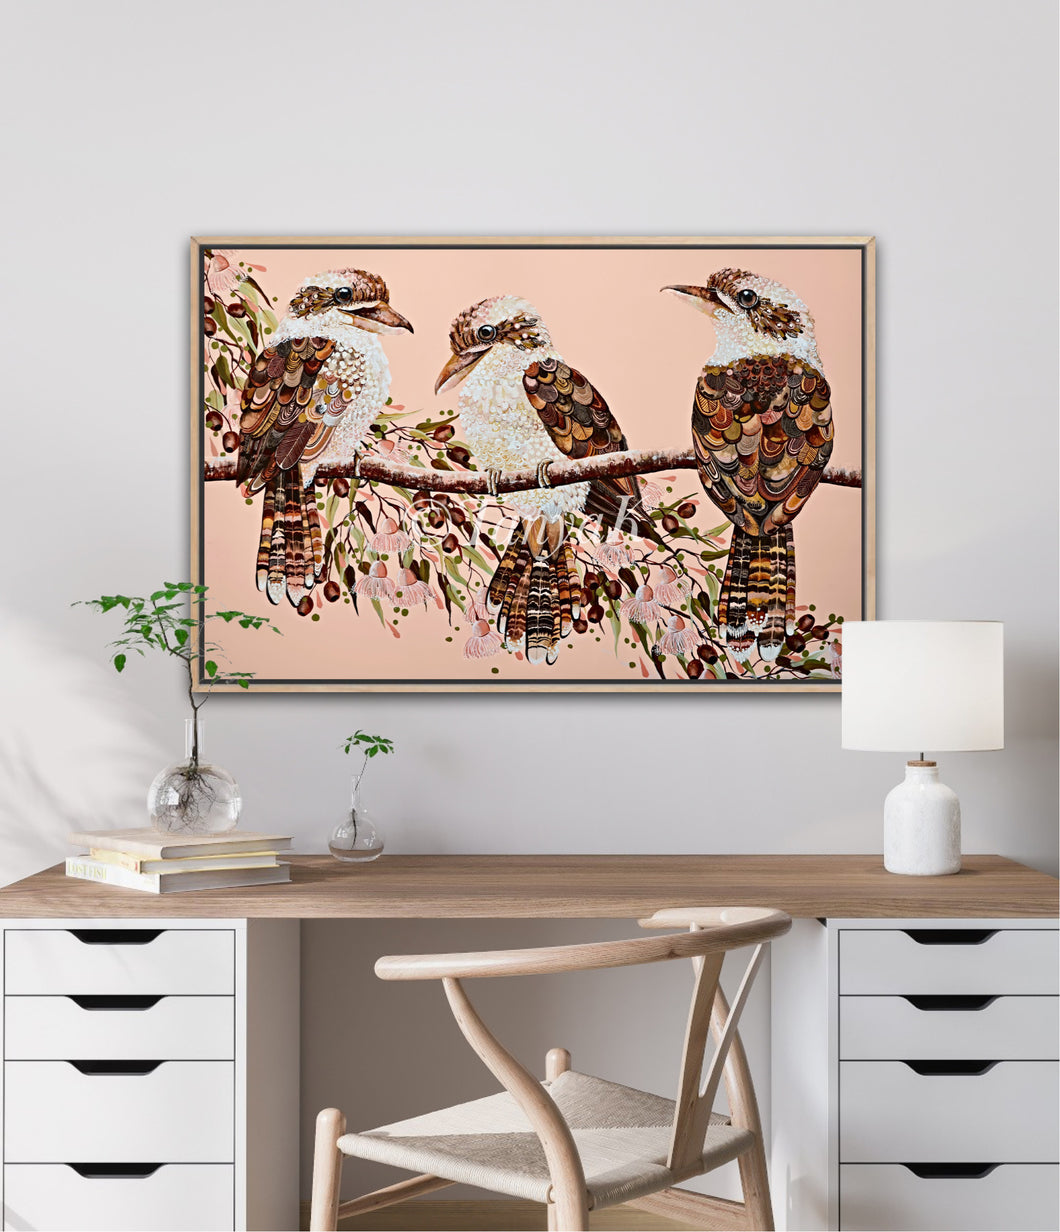 ‘Merry Queens of the Bush’ print